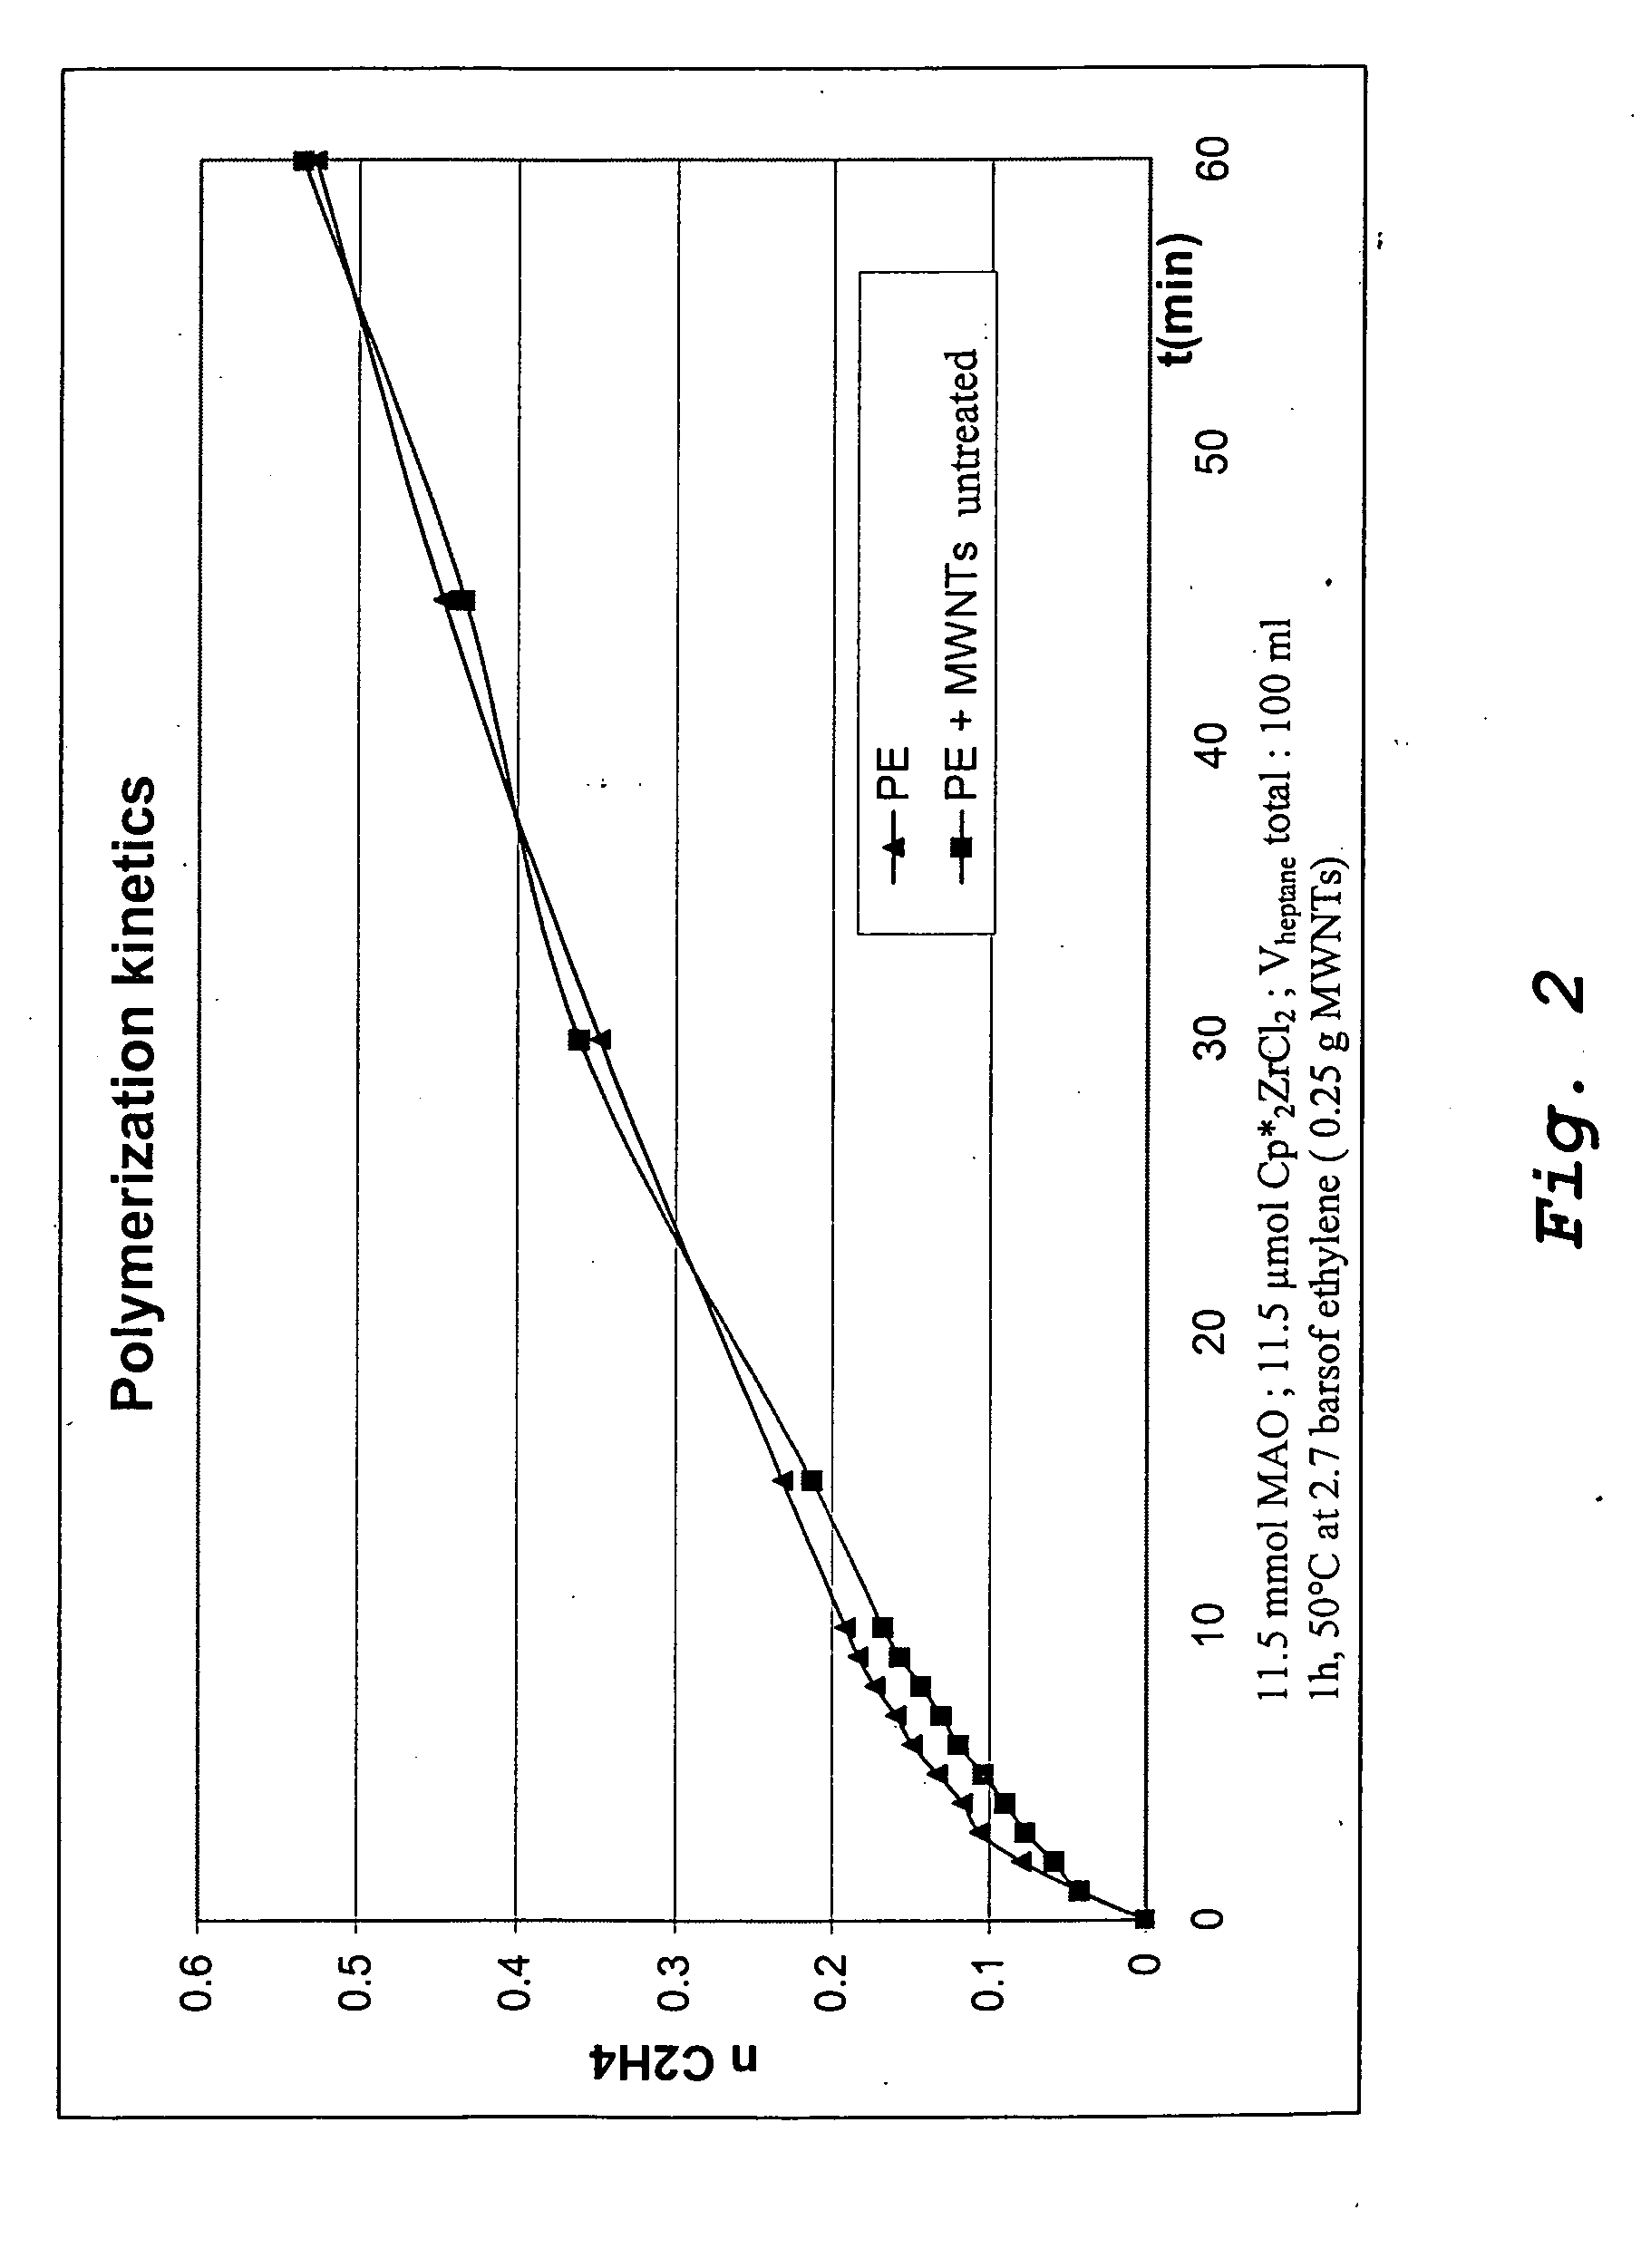 Polymer-based composites comprising carbon nanotubes as a filler method for producing said composites, and associated uses